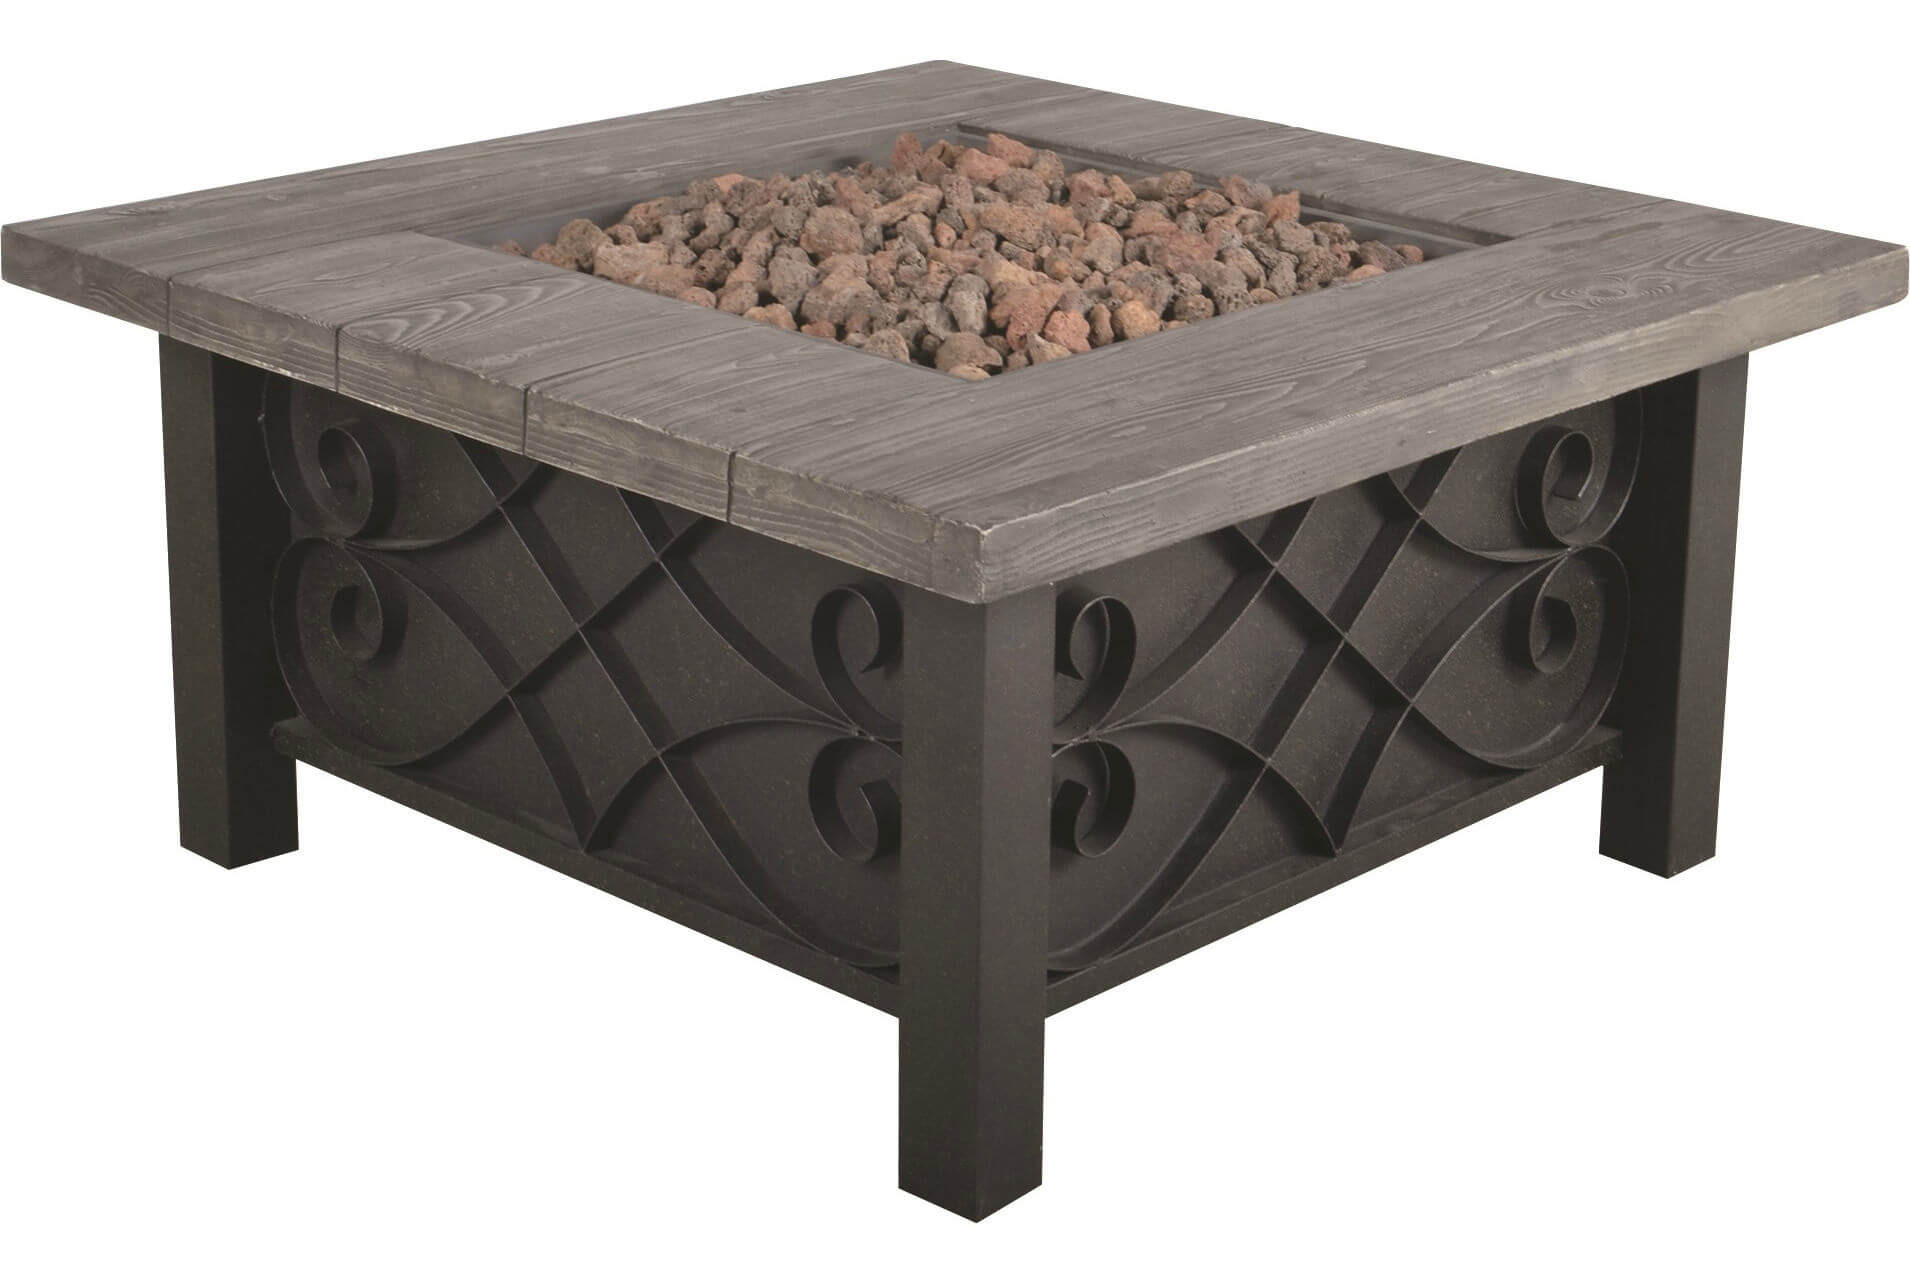 Propane Deck Fire Pit
 Top 15 Types of Propane Patio Fire Pits with Table Buying